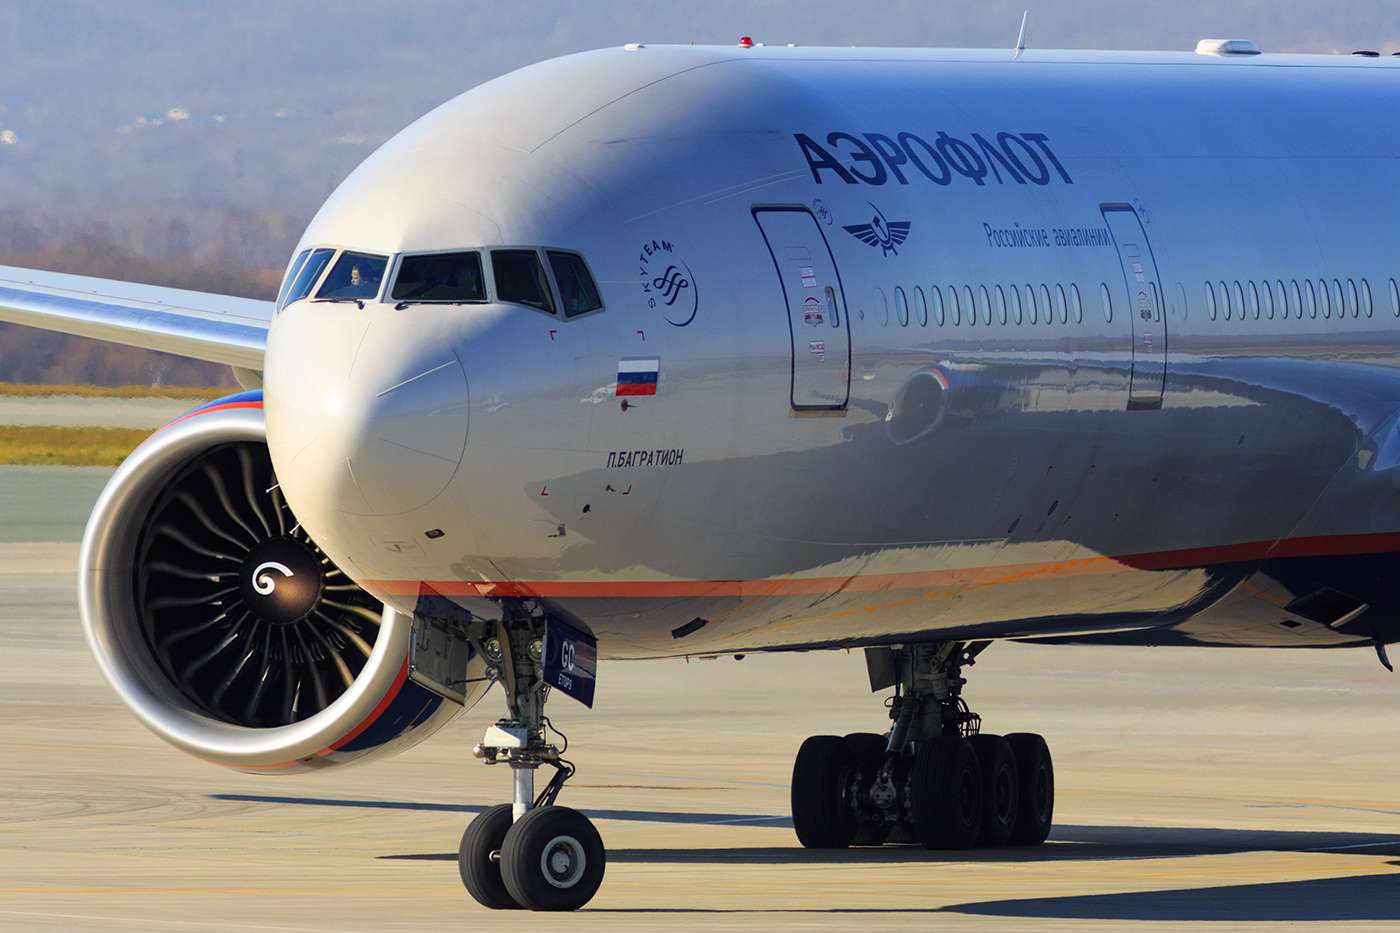 Aeroflot Pushes Ahead With Foreign Plane Settlement